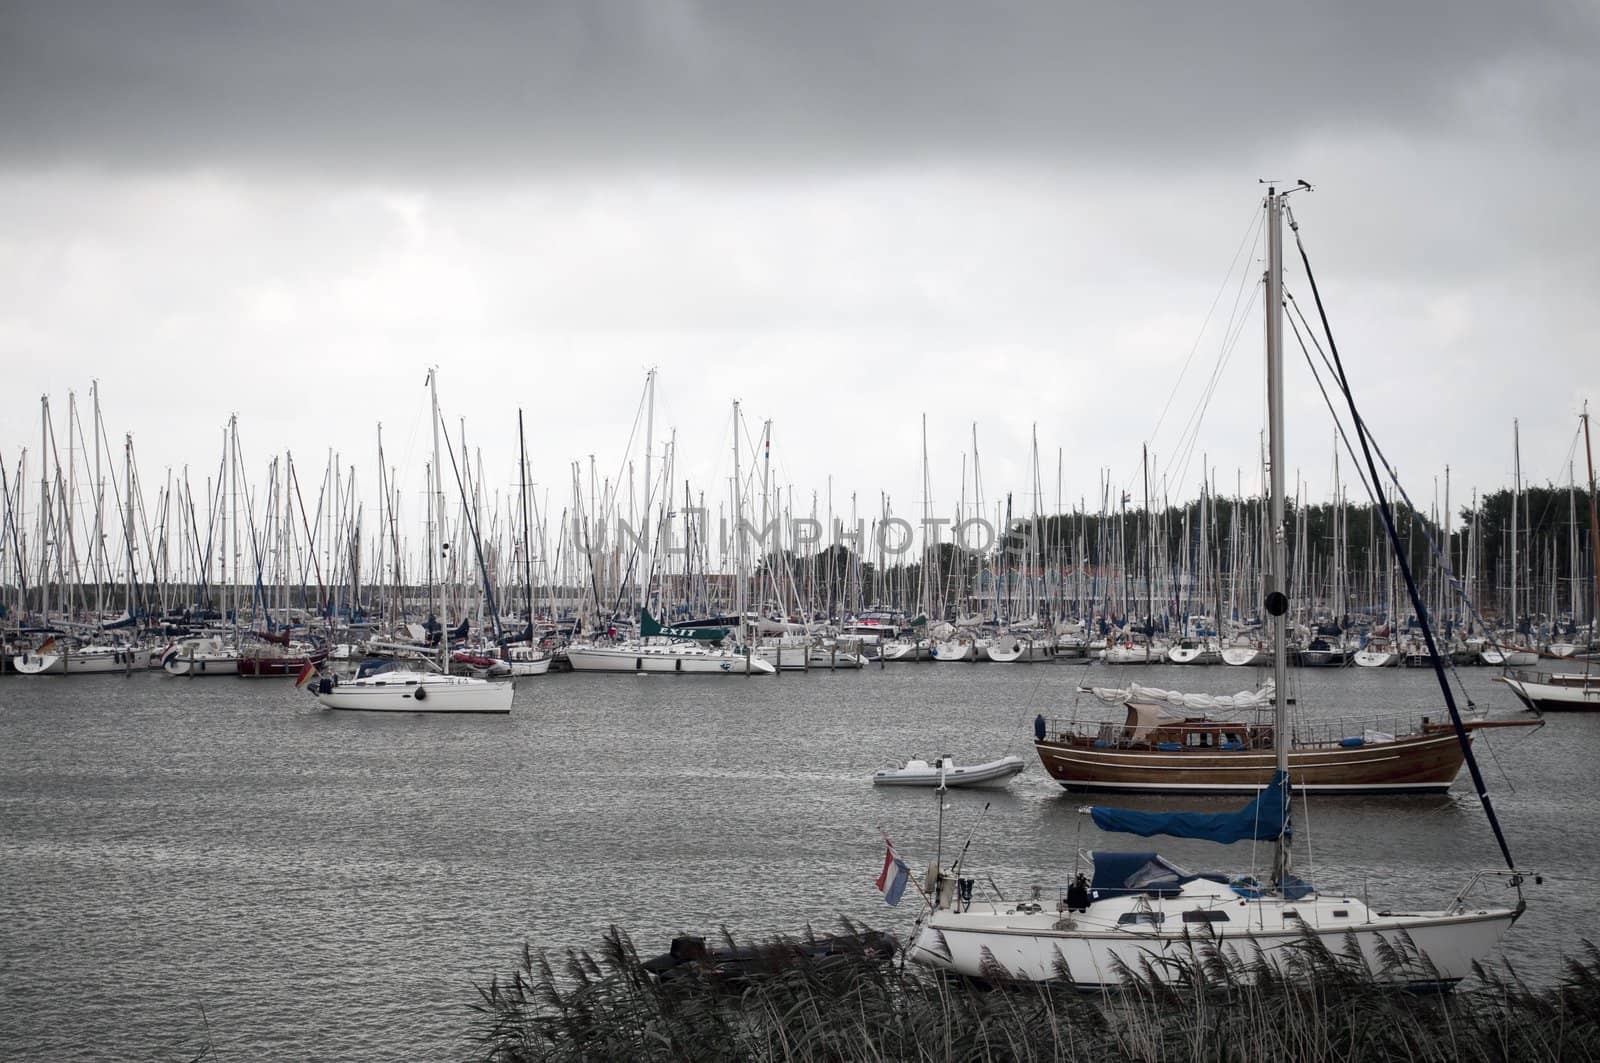 moored Saling boats in an harbor during bad weather